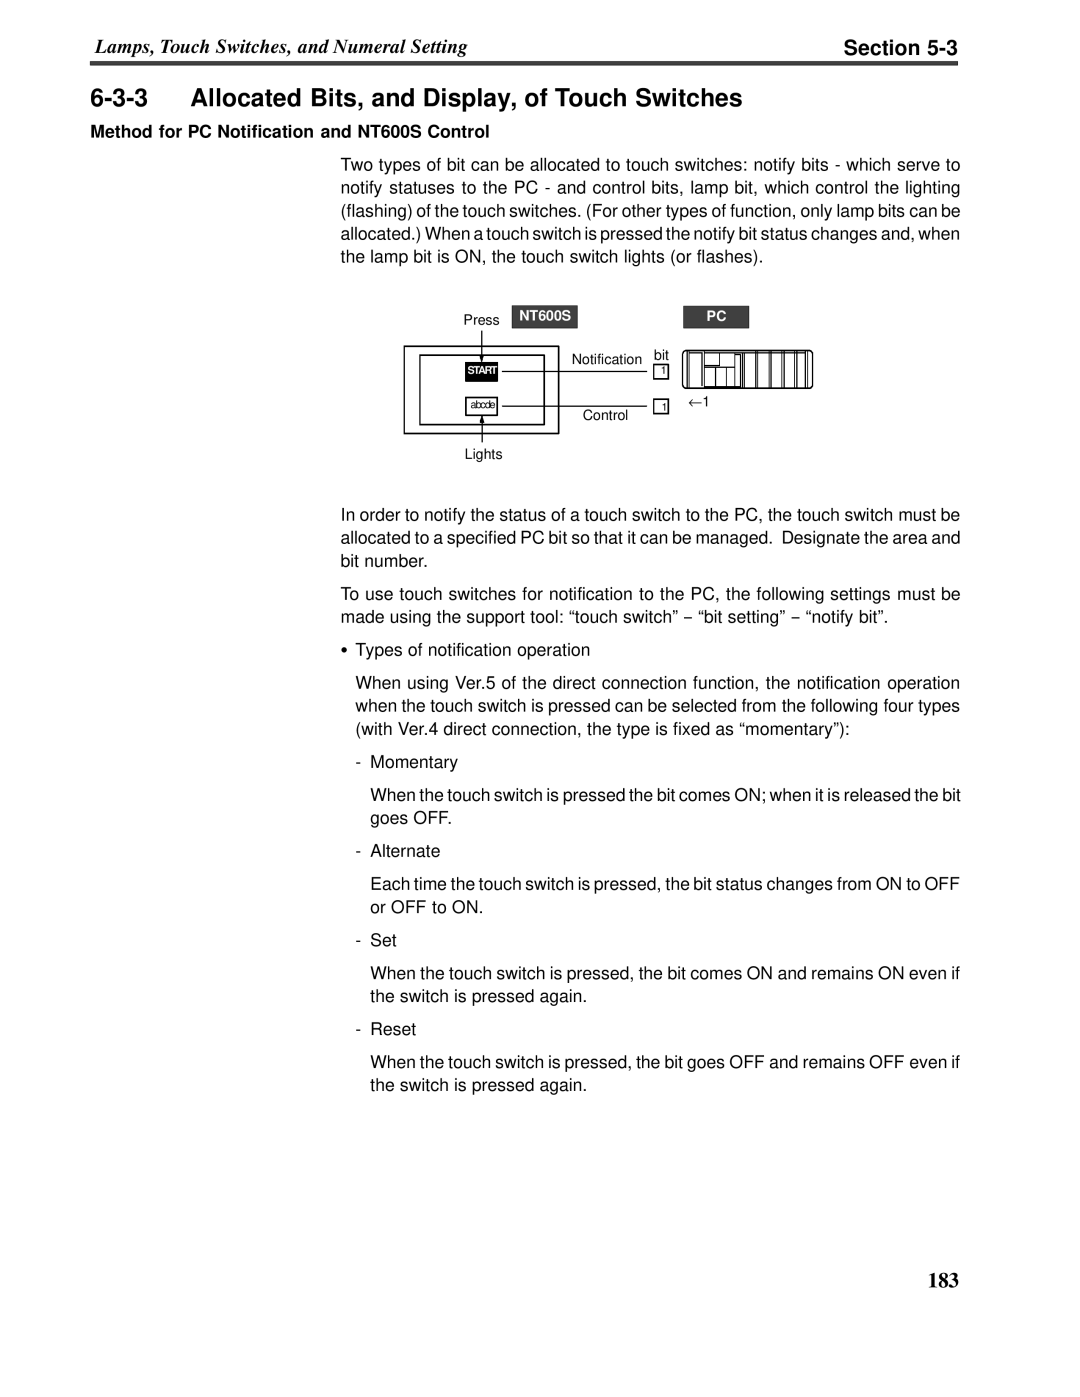 Omron V022-E3-1 operation manual Section, Method for PC Notification and NT600S Control 